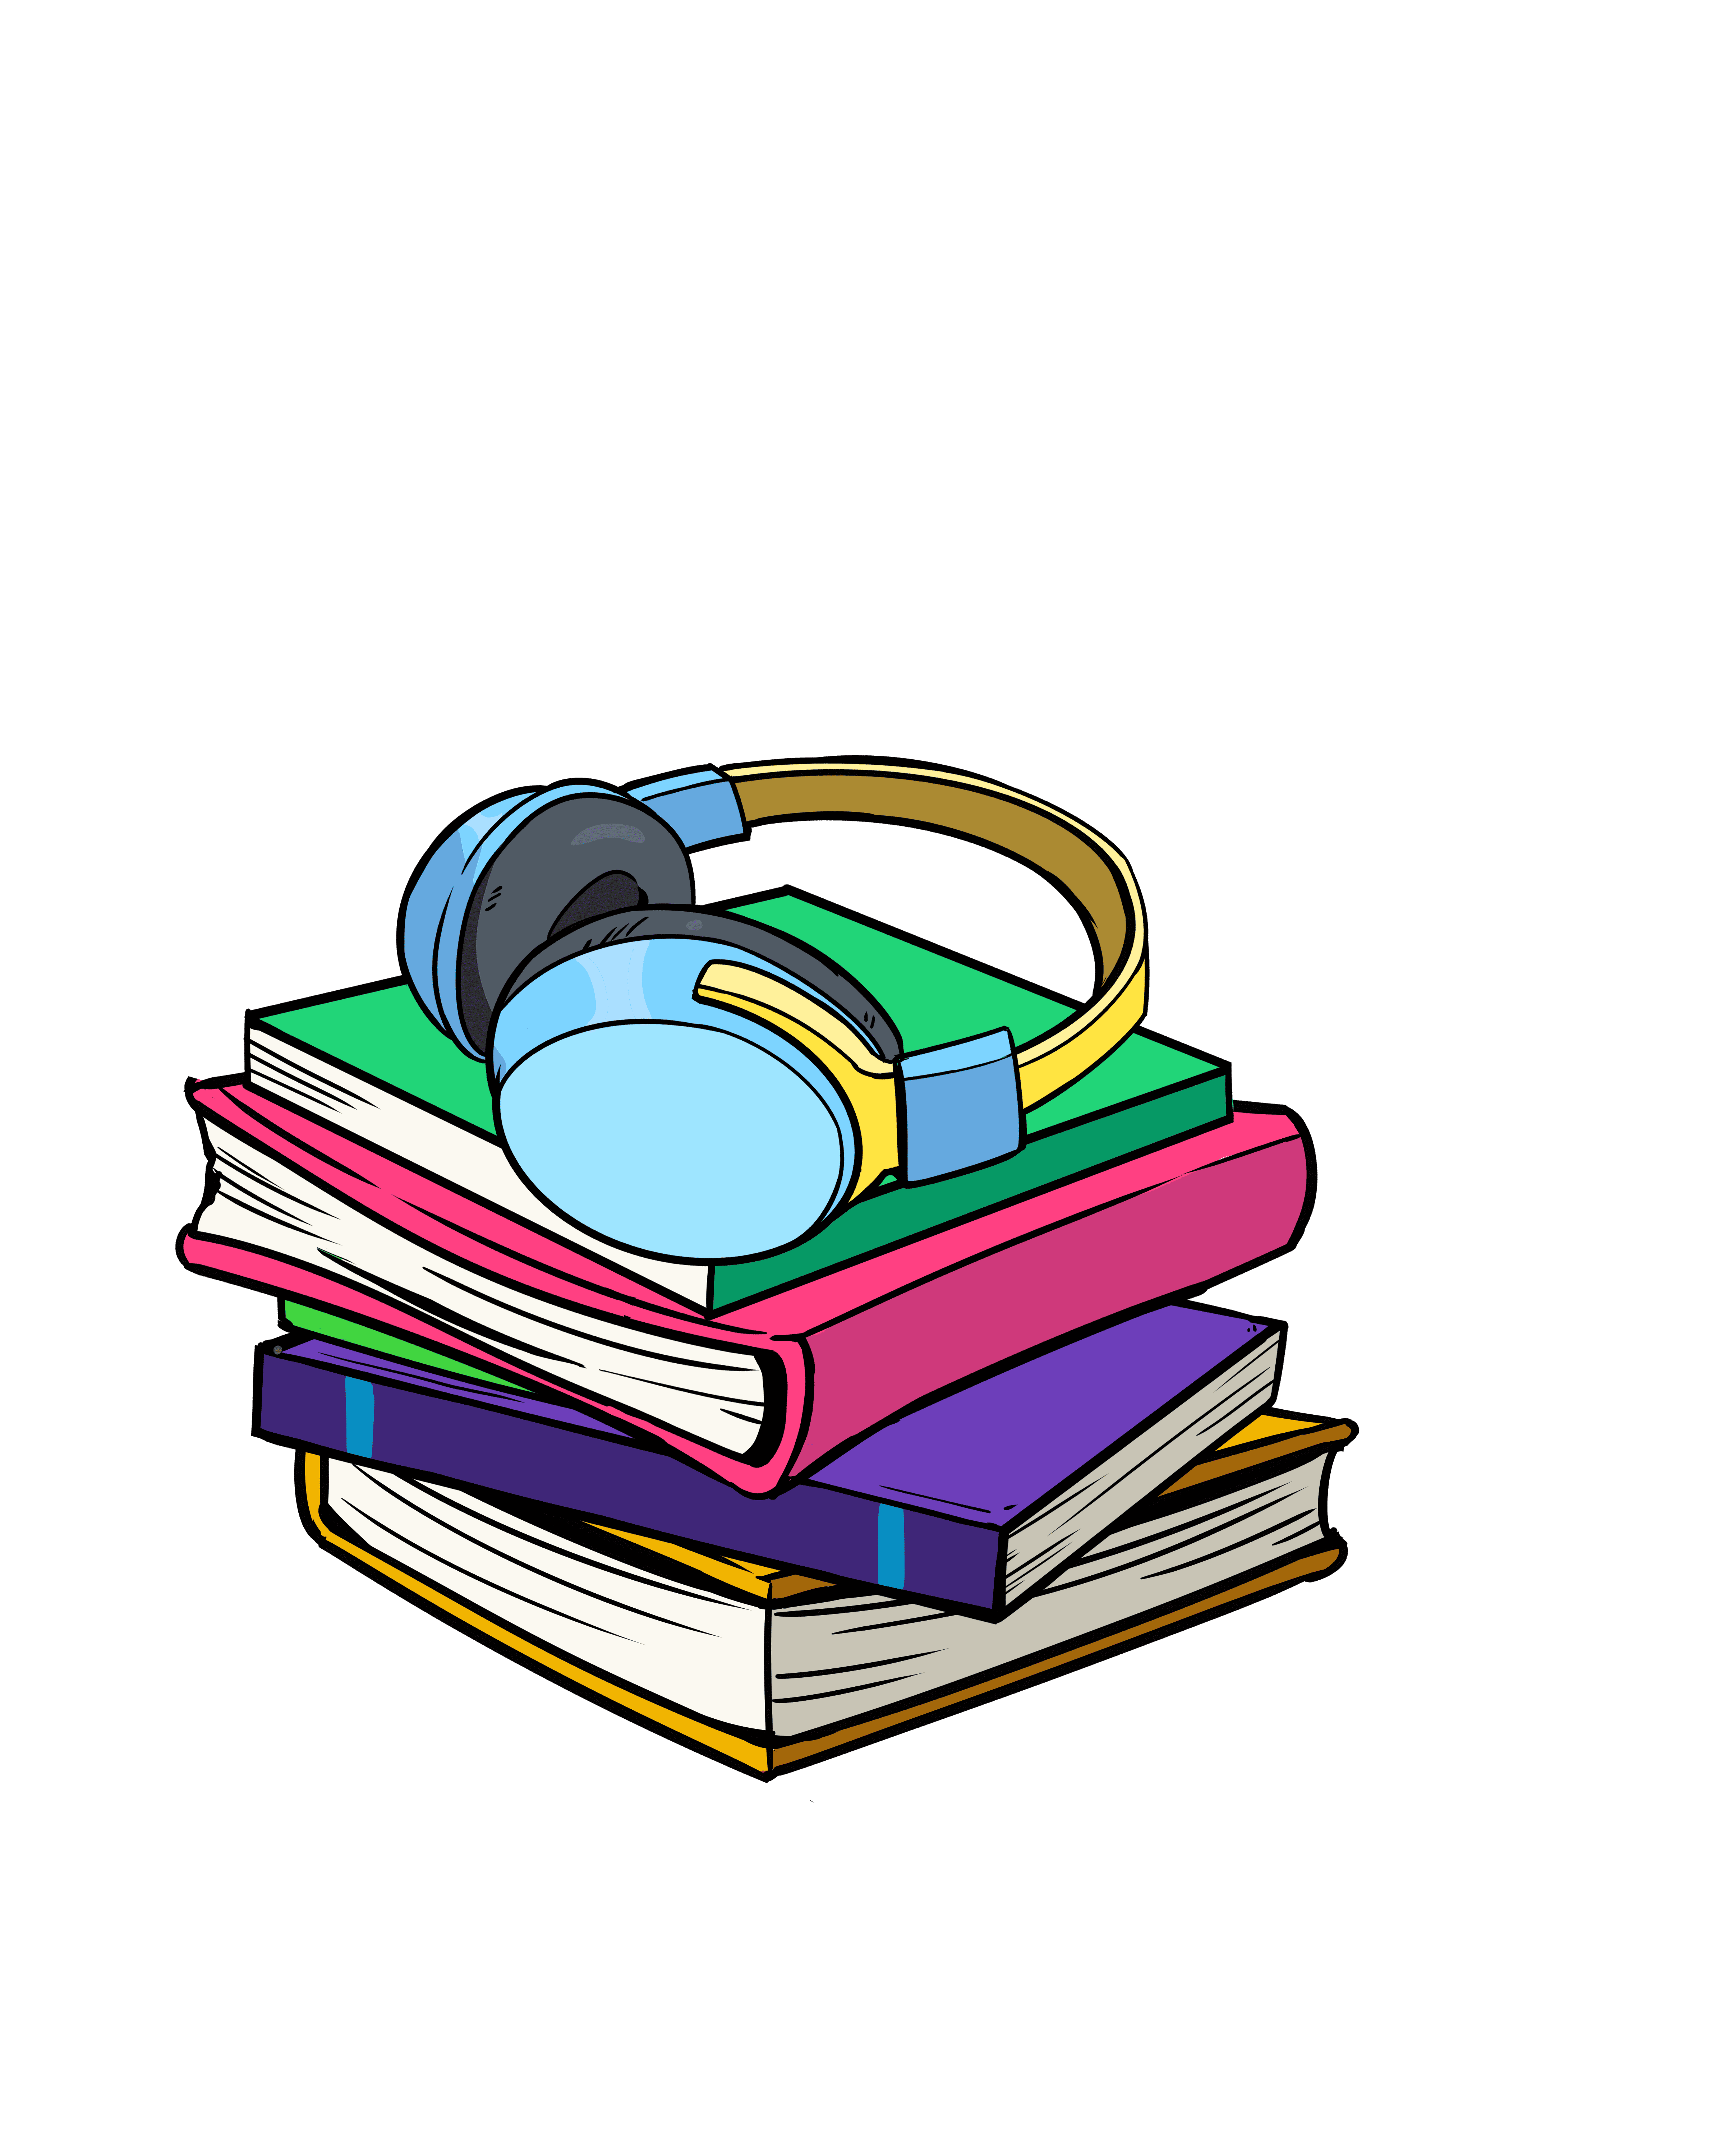 cartoon/illustration of stack of books with headphones on top.